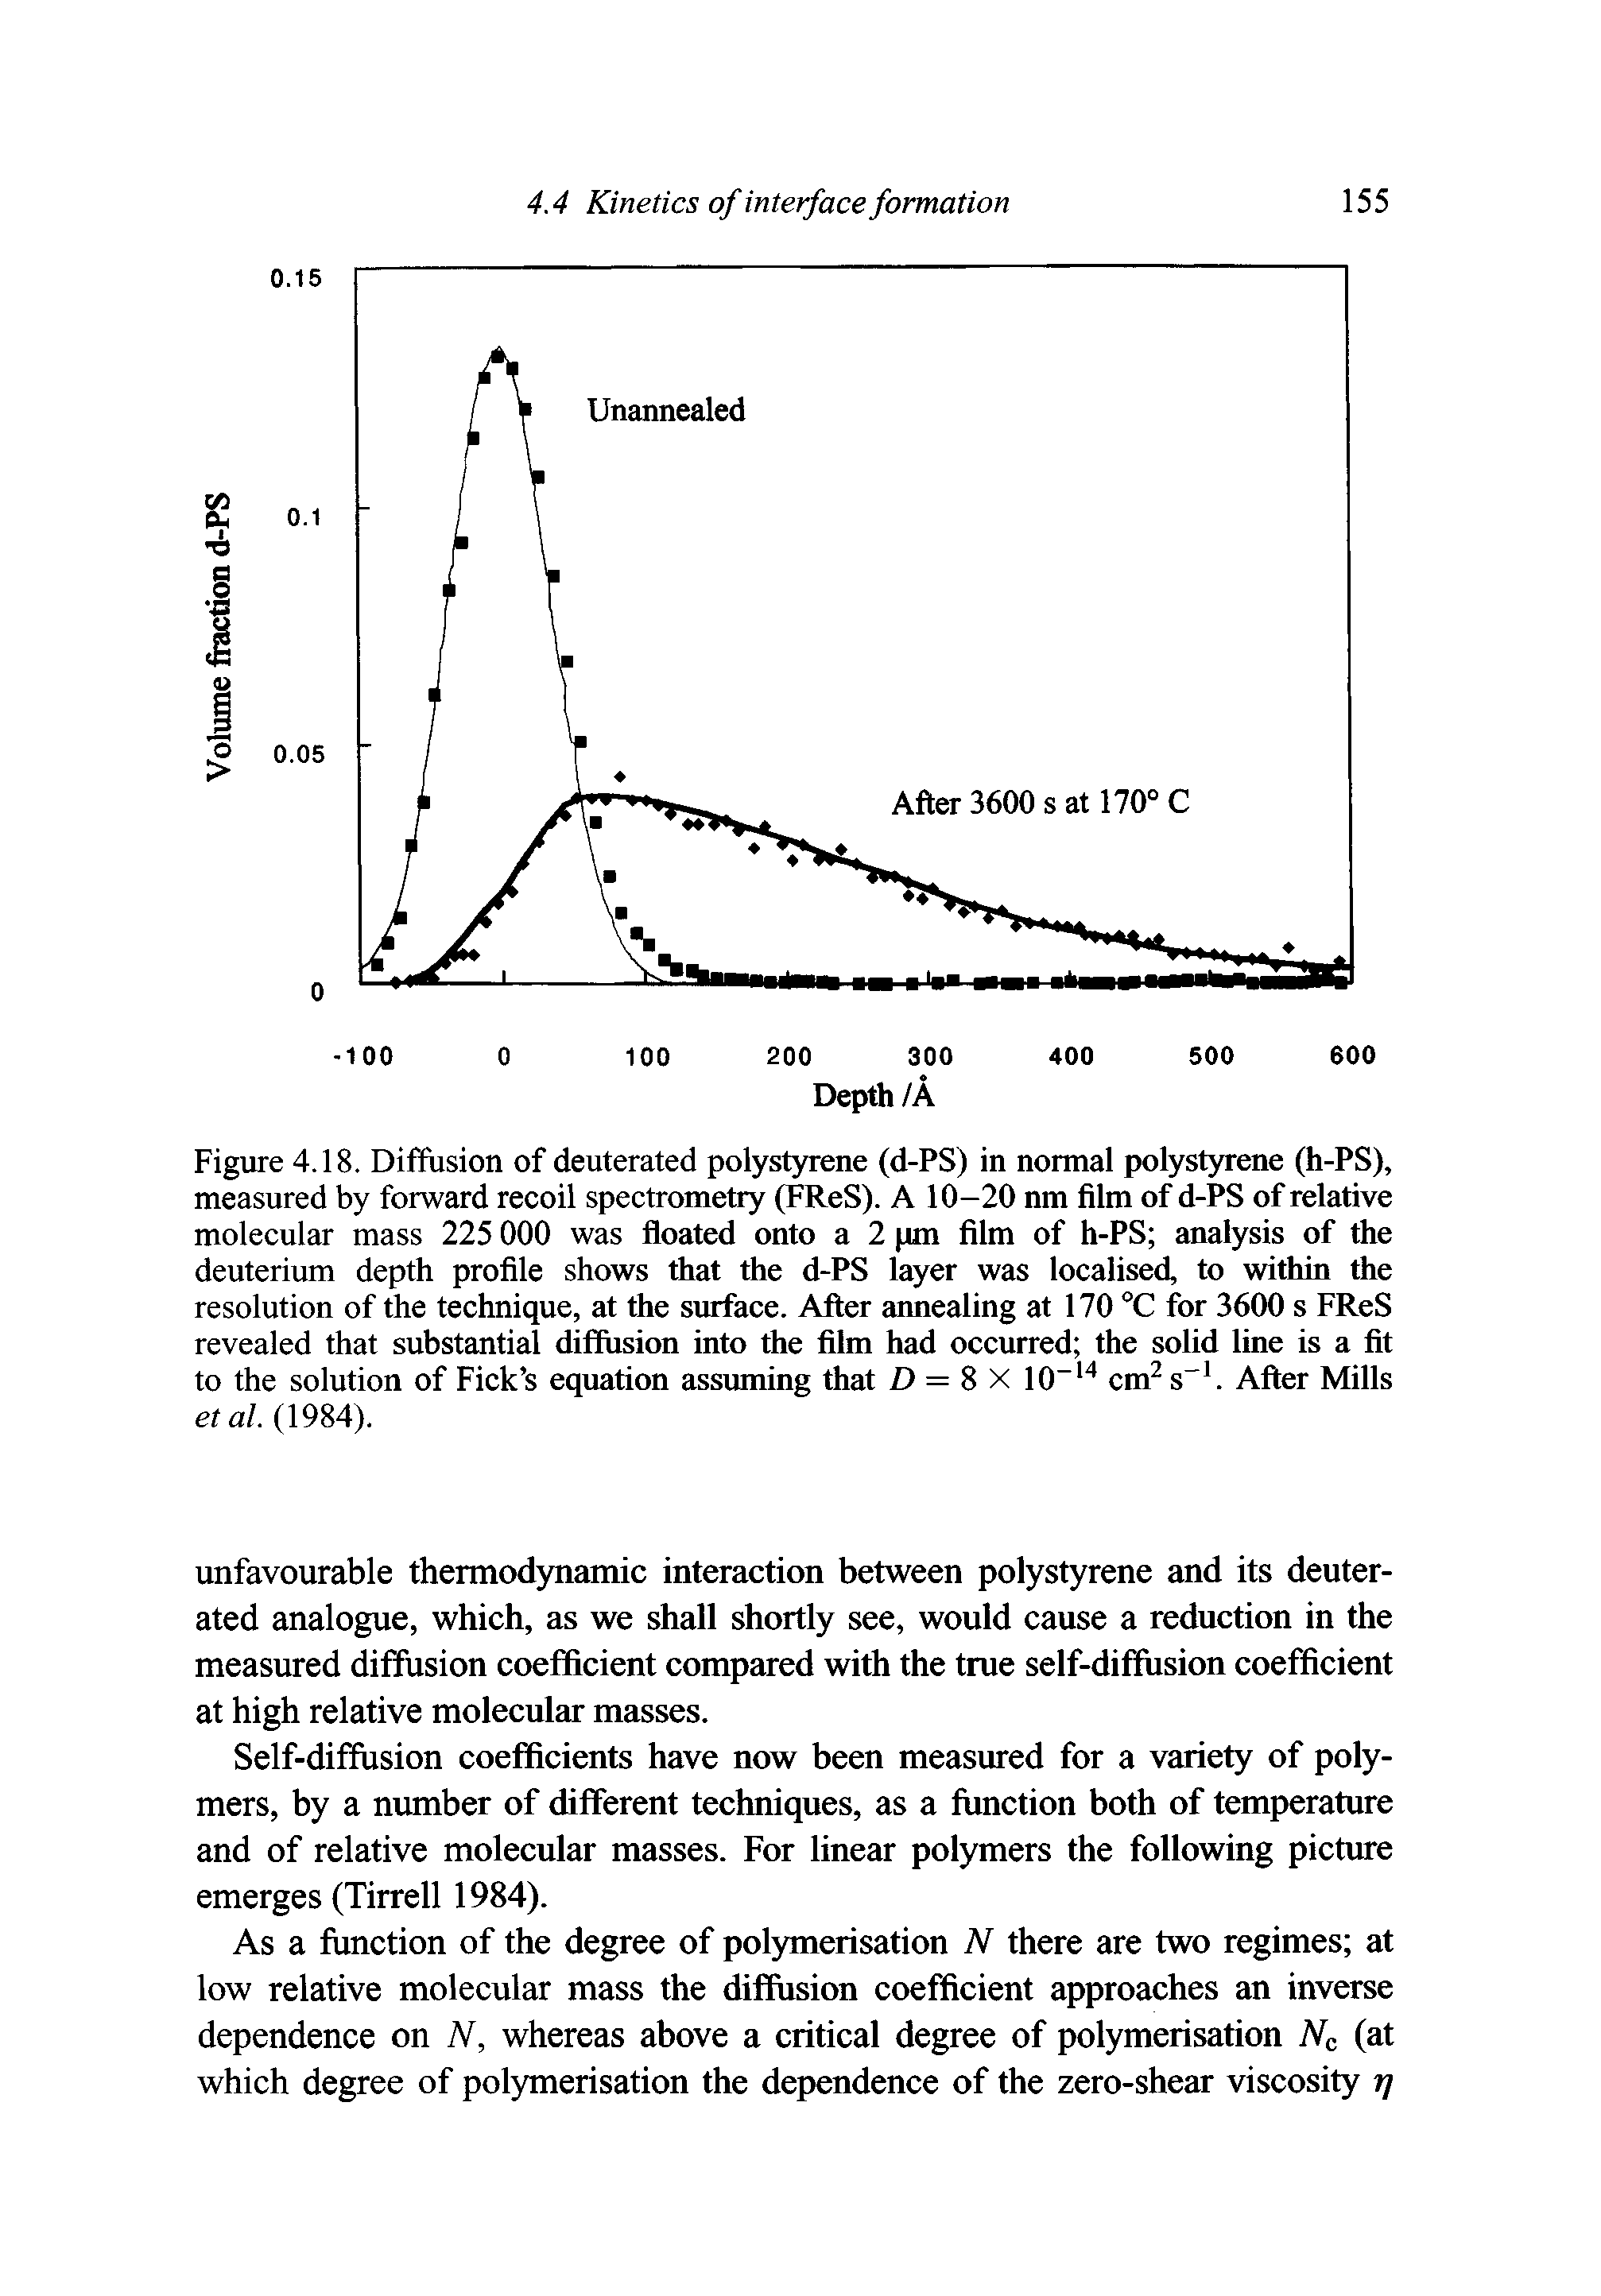 Figure 4.18. Diffusion of deuterated polystyrene (d-PS) in normal polystyrene (h-PS), measured by forward recoil spectrometry (FReS). A 10-20 nm film of d-PS of relative molecular mass 225 000 was floated onto a 2 pm film of h-PS analysis of the deuterium depth profile shows that the d-PS layer was localised, to within the resolution of the technique, at the surface. After atmealing at 170 °C for 3600 s FReS revealed that substantial diffusion into the film had occurred the solid line is a fit to the solution of Fick s equation assmning that > = 8X10 cm s". After Mills et al. (1984).